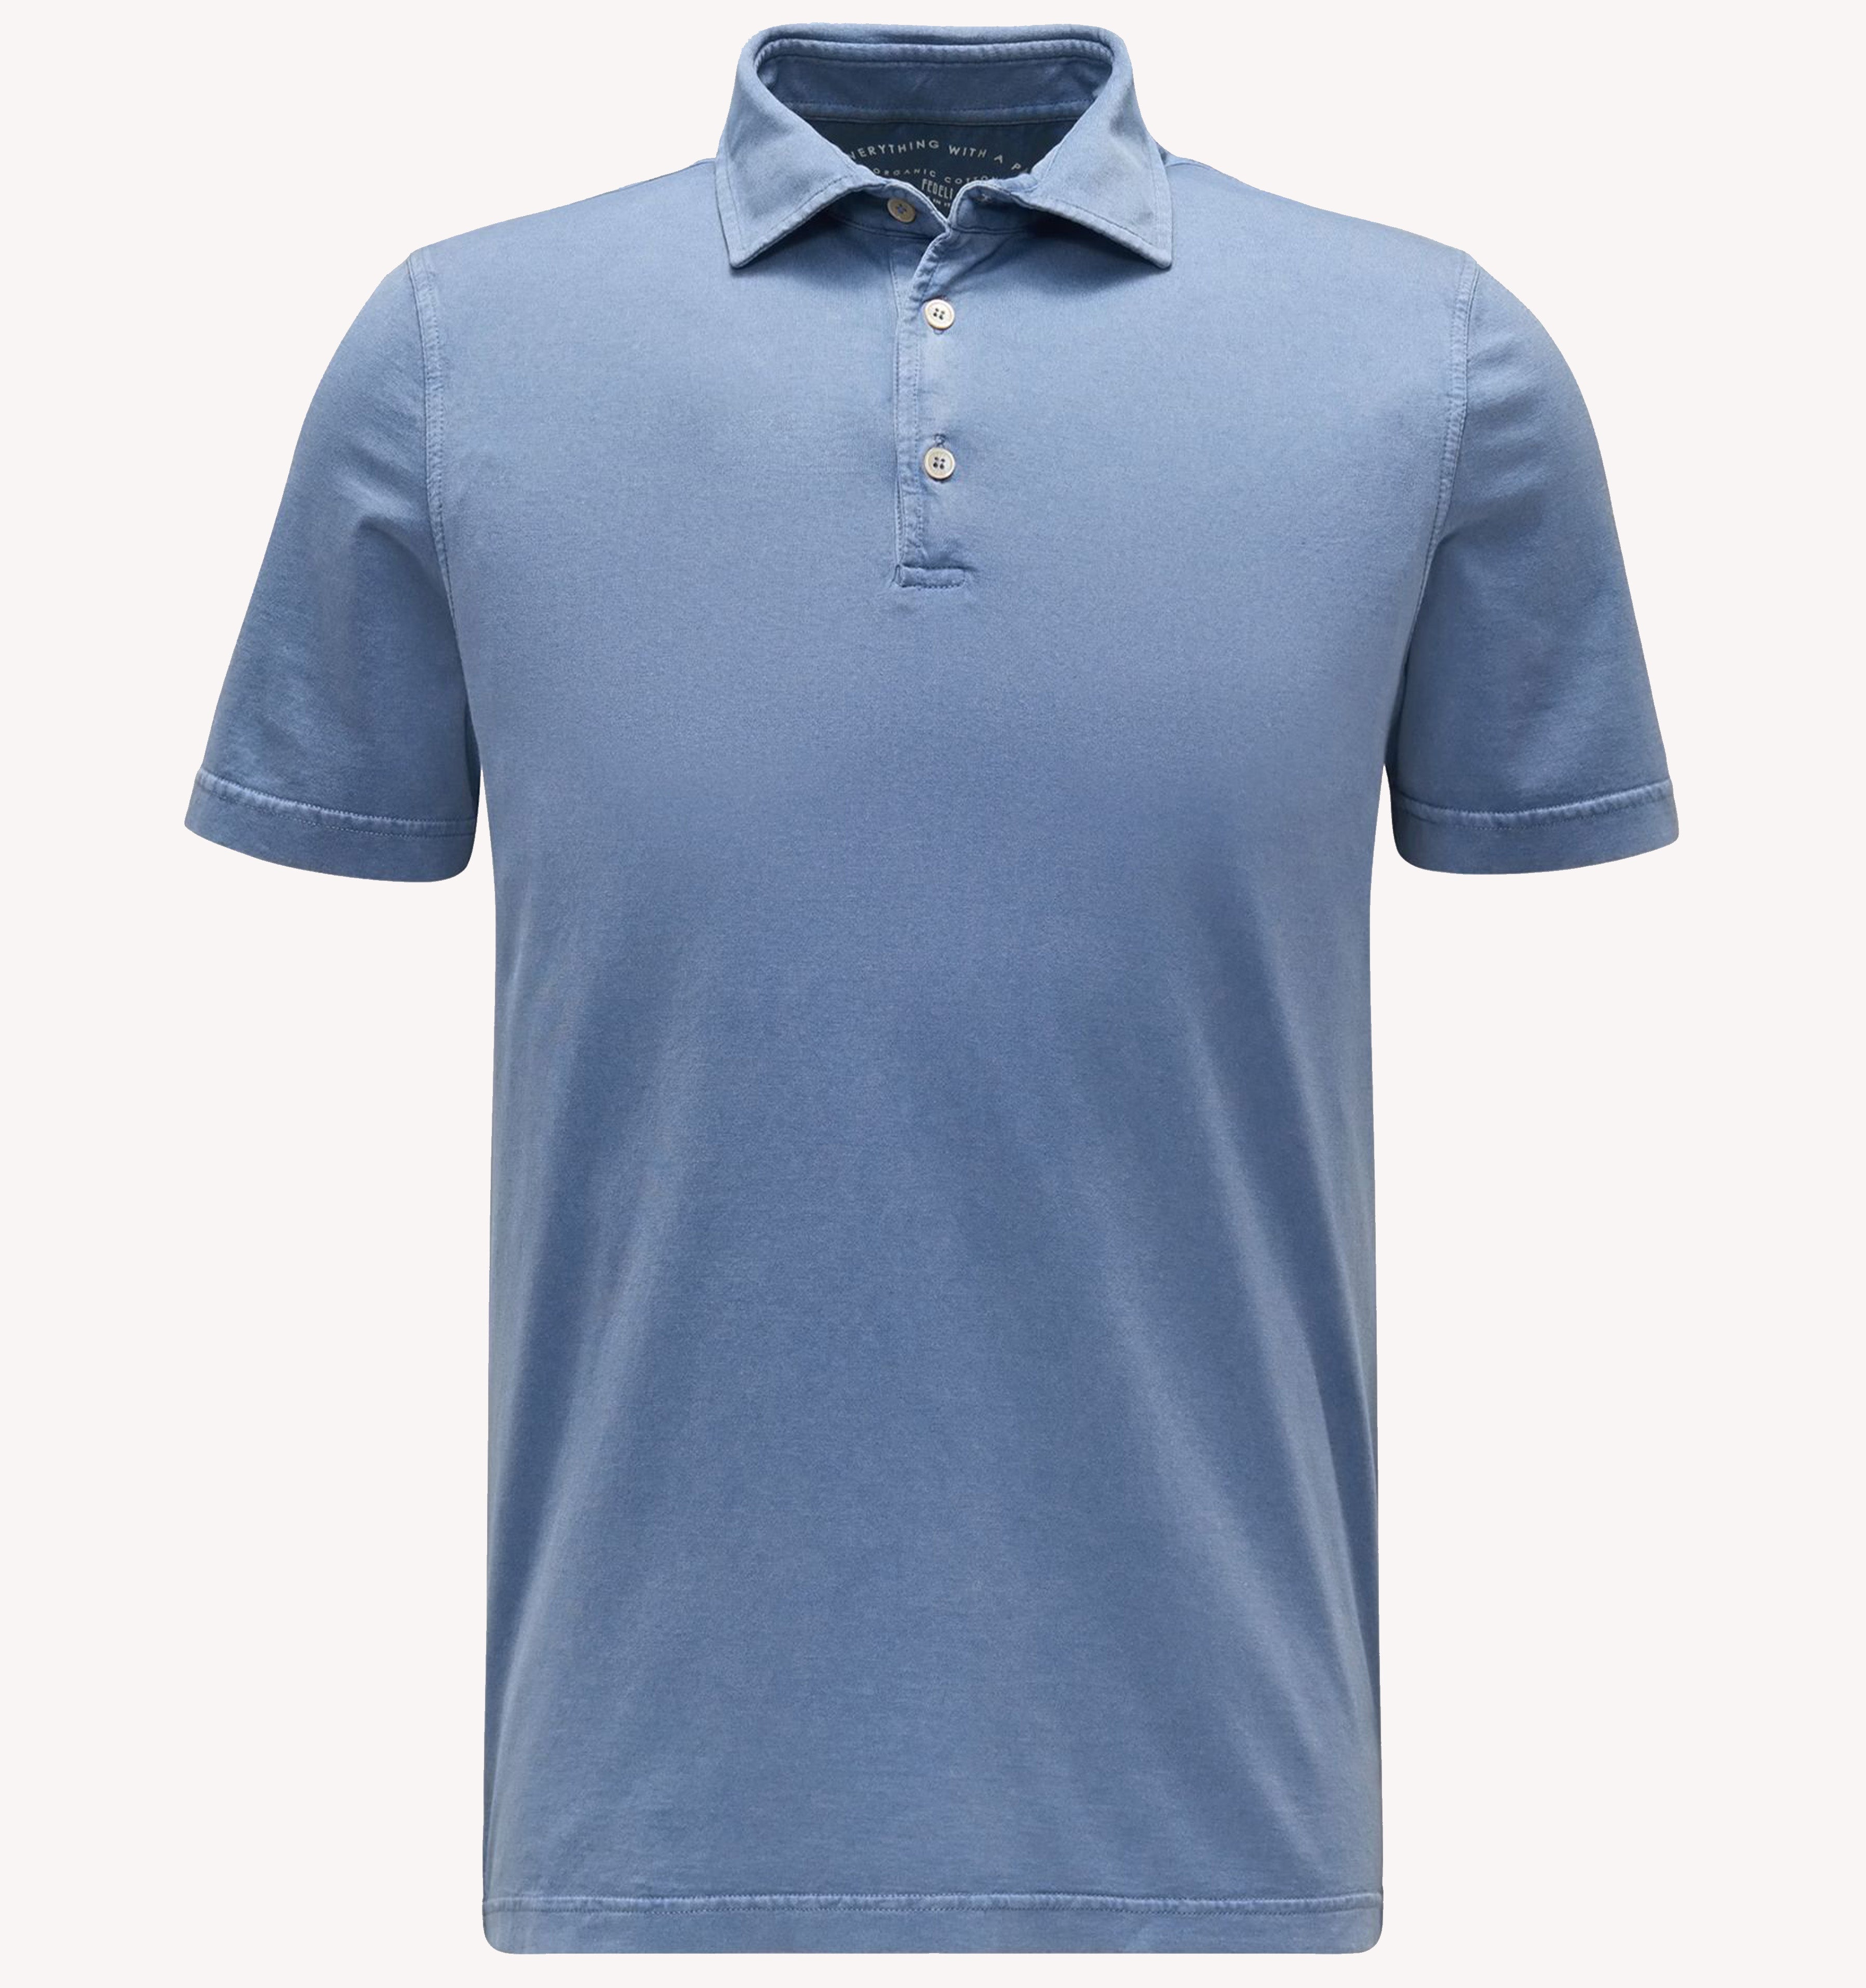 Fedeli Zero Polo in Frosted Smokey Blue - Taylor Richards & Conger